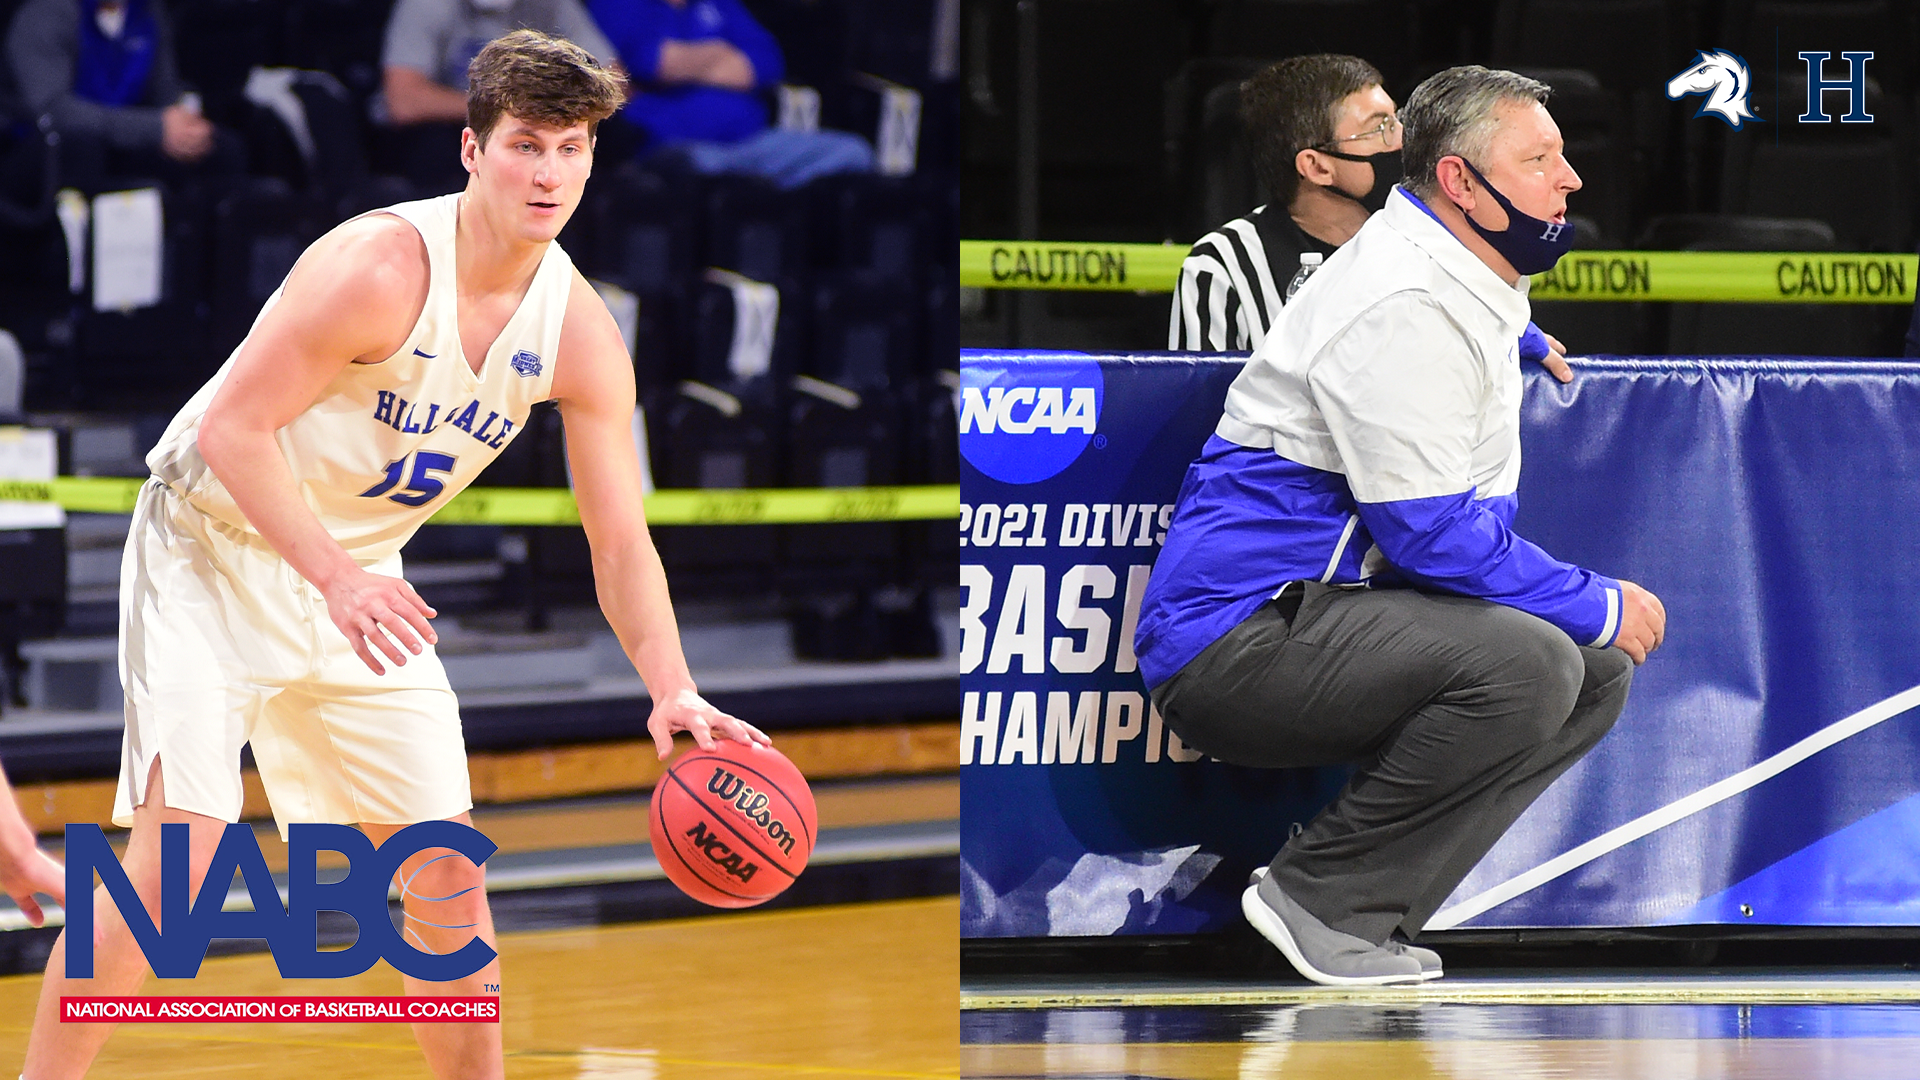 Cartier named a consensus All-American; Tharp named NABC Regional Coach of the Year